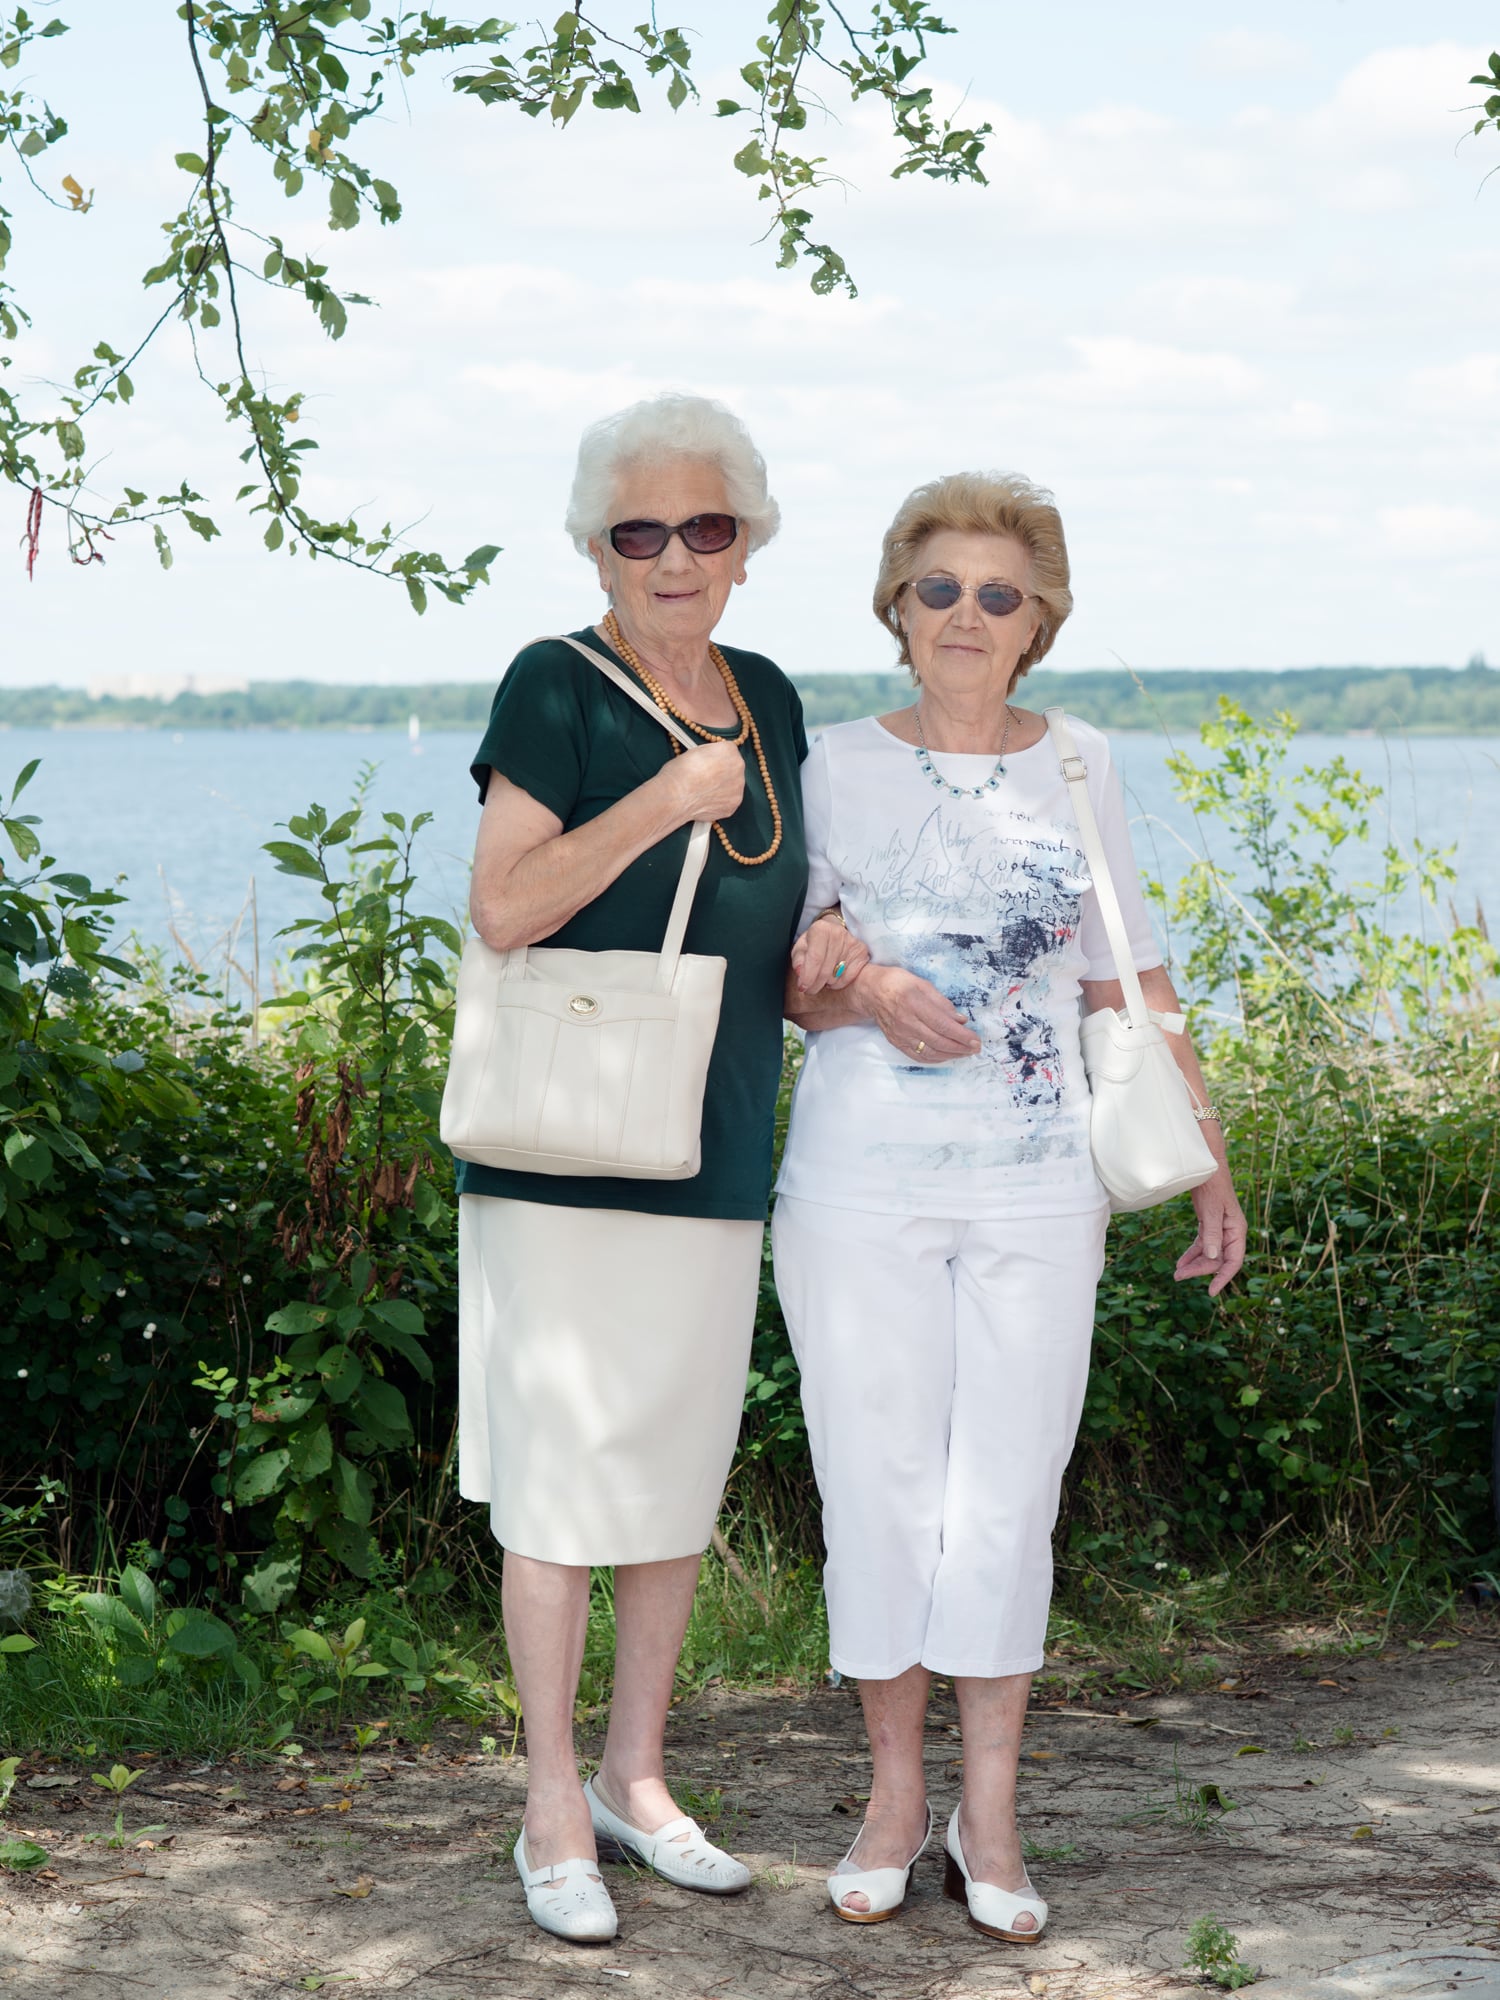  Eleanore and Erika  Eleanore and Erika are visiting lake "Senftenberger See". They live in the city Senftenberg, which is bordering the lake and they remember how different it used to look here. According to them people from Senftenberg are very pro